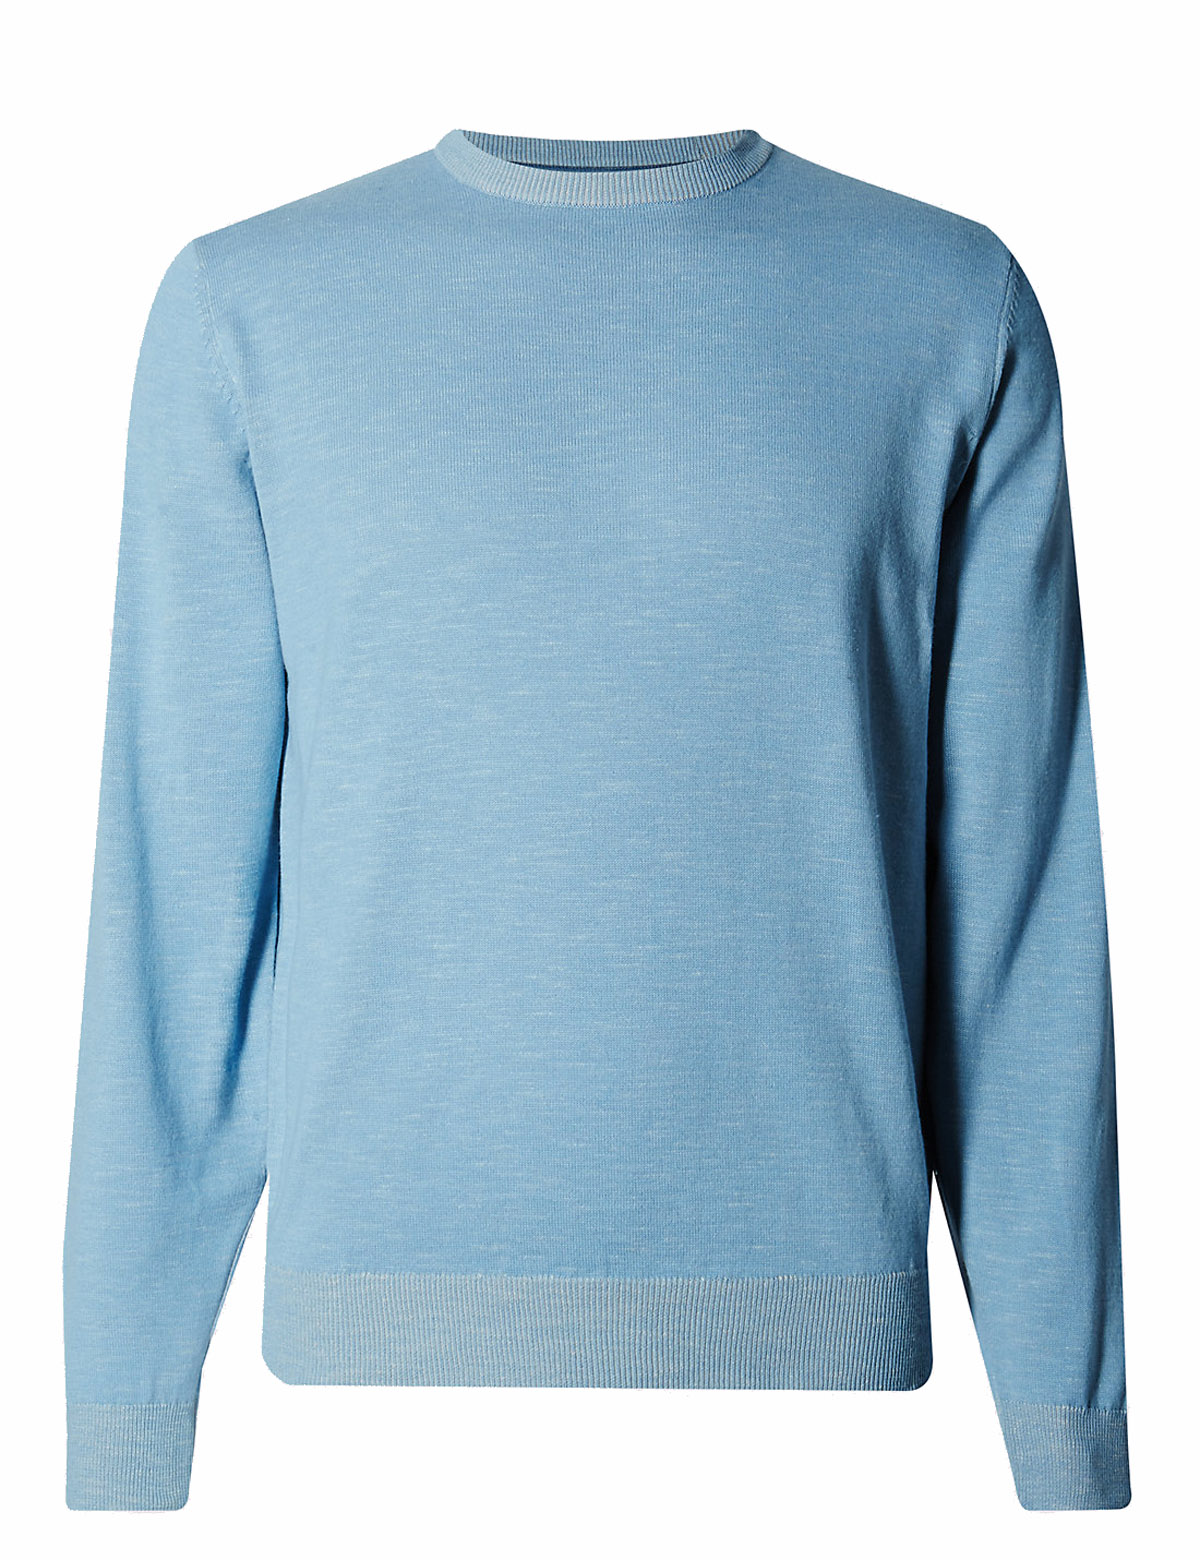 Marks and Spencer - - m&5 Light Blue Pure Cotton Plaited Jumper - Size ...